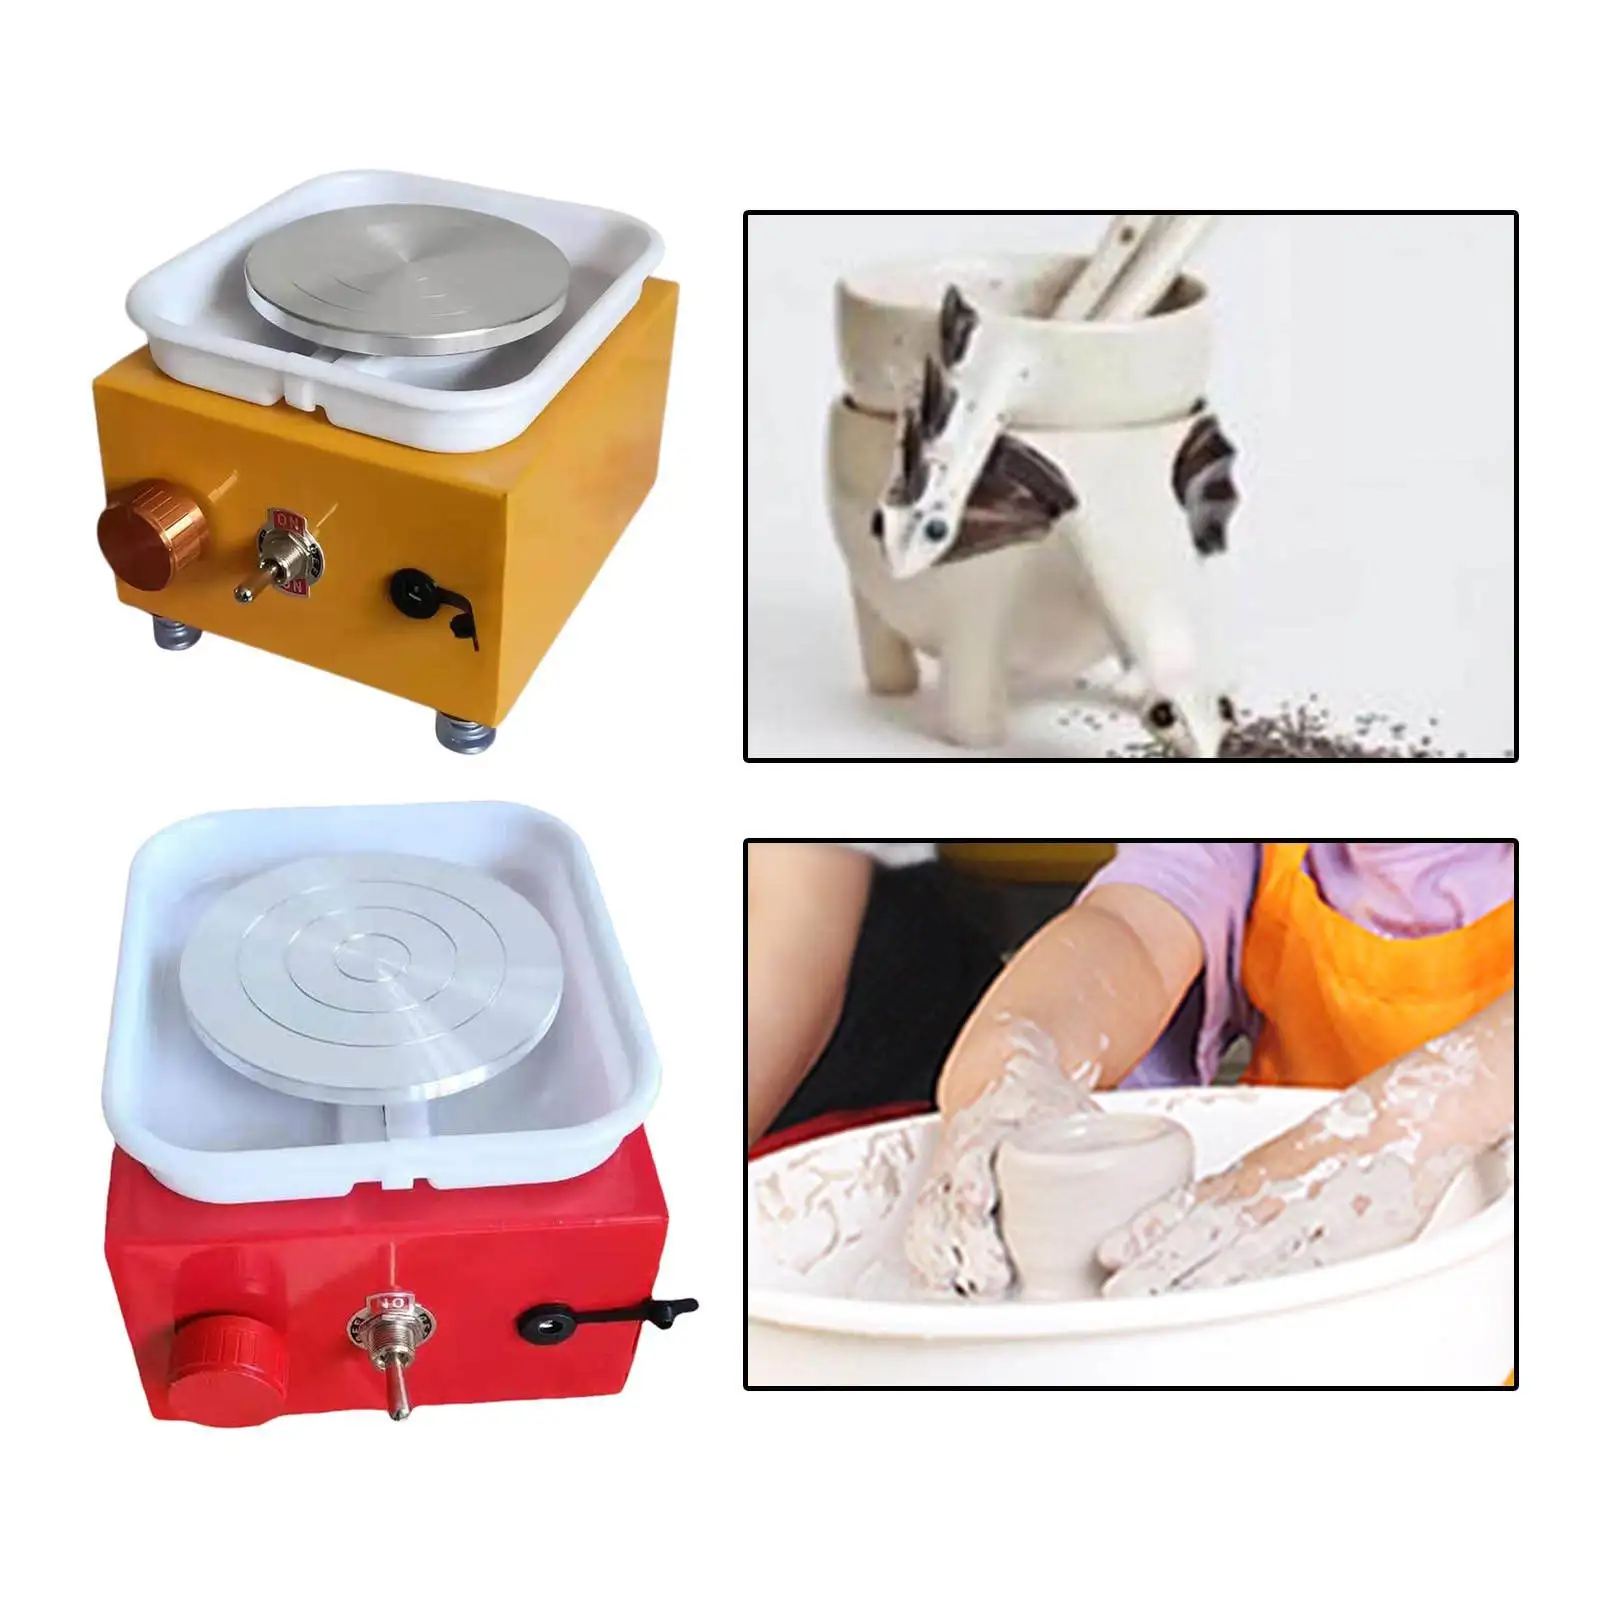 Electric Pottery Wheel Mini Clay Forming Art Craft Ceramic Trimming Wheel US Plug Tool Machine for School Teaching Kids Home Use